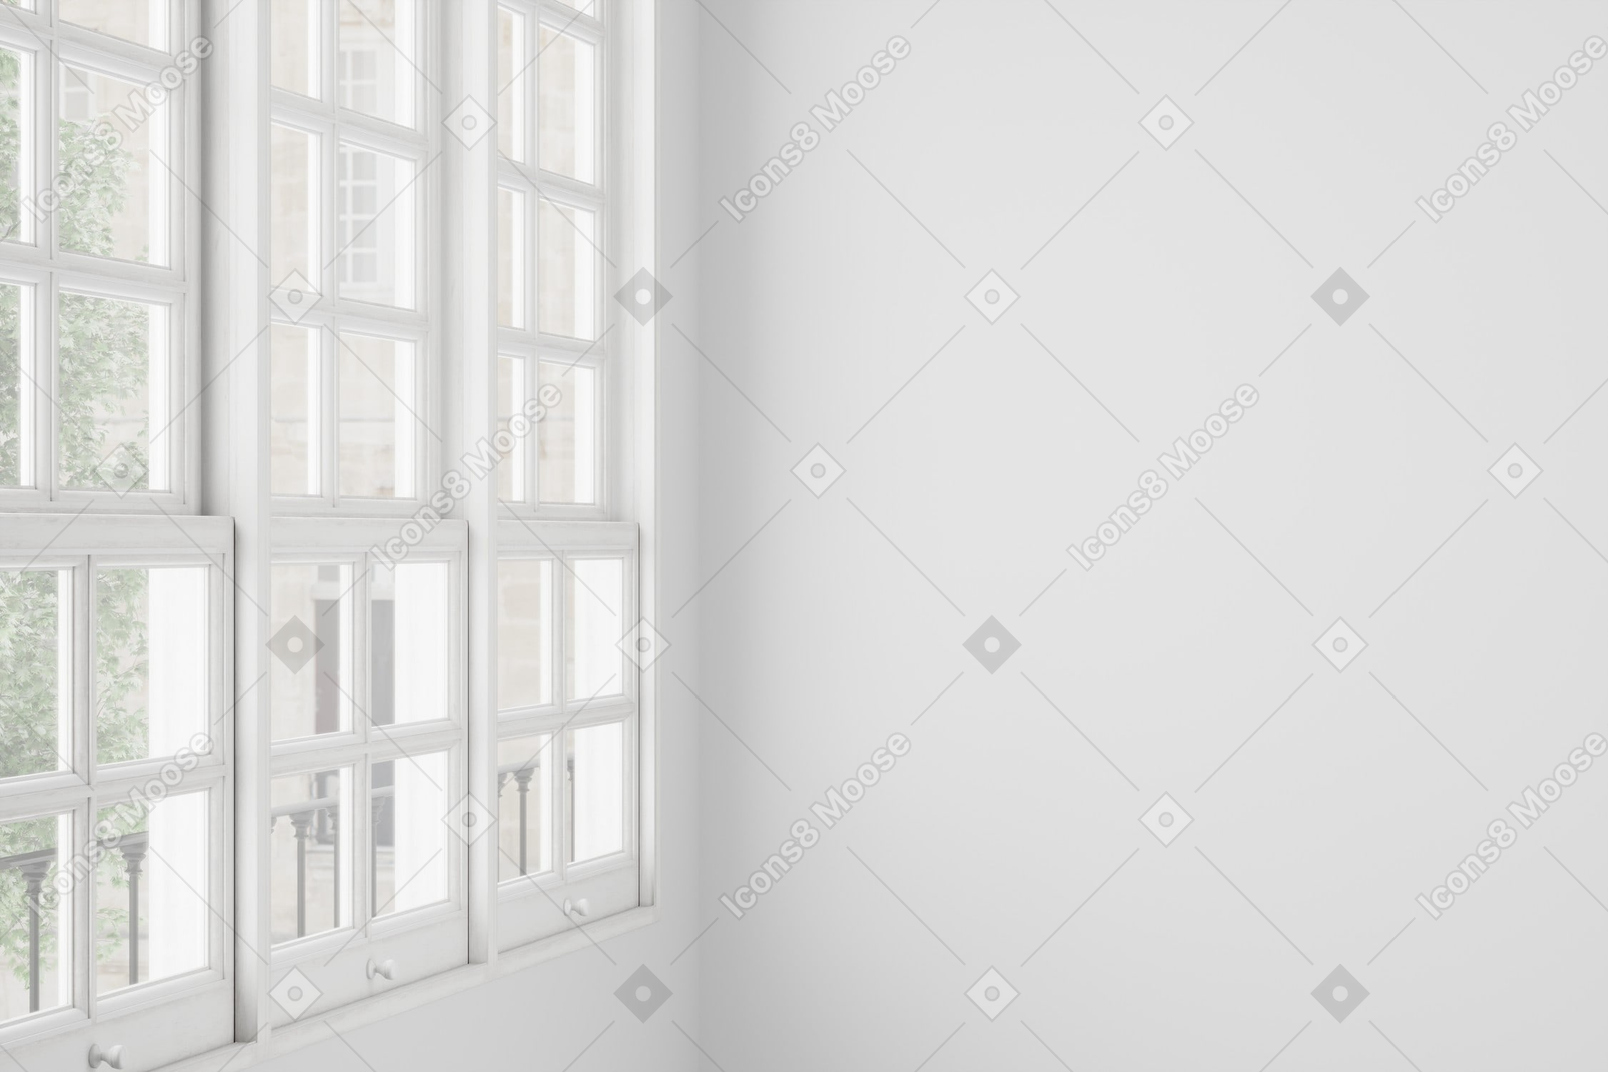 Large window with white wooden frames